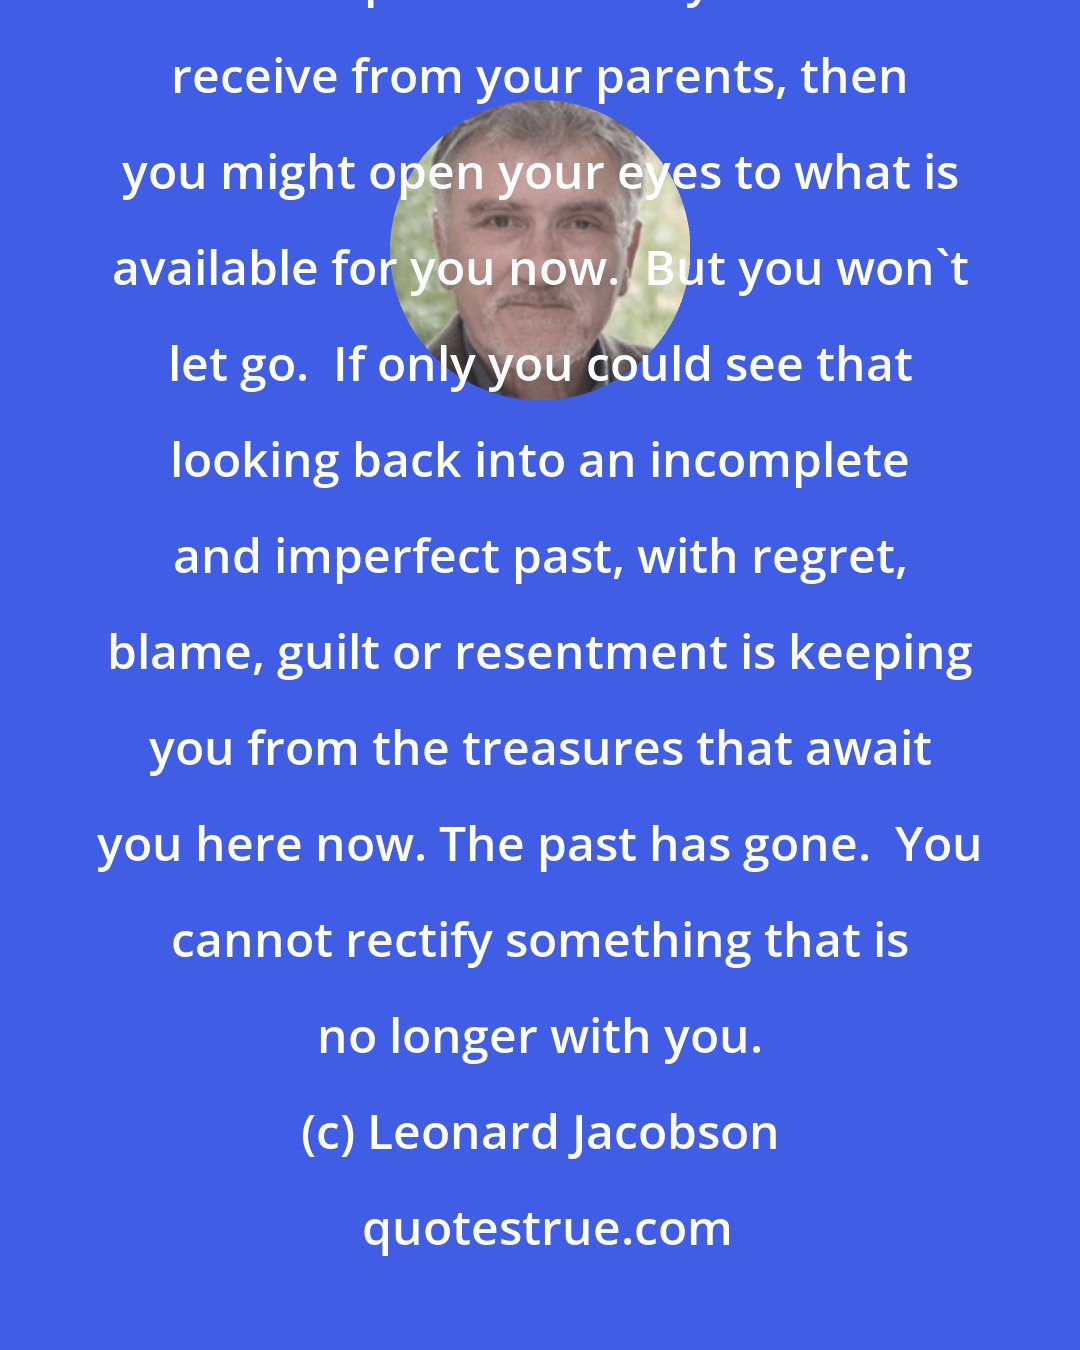 Leonard Jacobson: You don't realize that if you stop looking backwards craving the love and acceptance which you didn't receive from your parents, then you might open your eyes to what is available for you now.  But you won't let go.  If only you could see that looking back into an incomplete and imperfect past, with regret, blame, guilt or resentment is keeping you from the treasures that await you here now. The past has gone.  You cannot rectify something that is no longer with you.